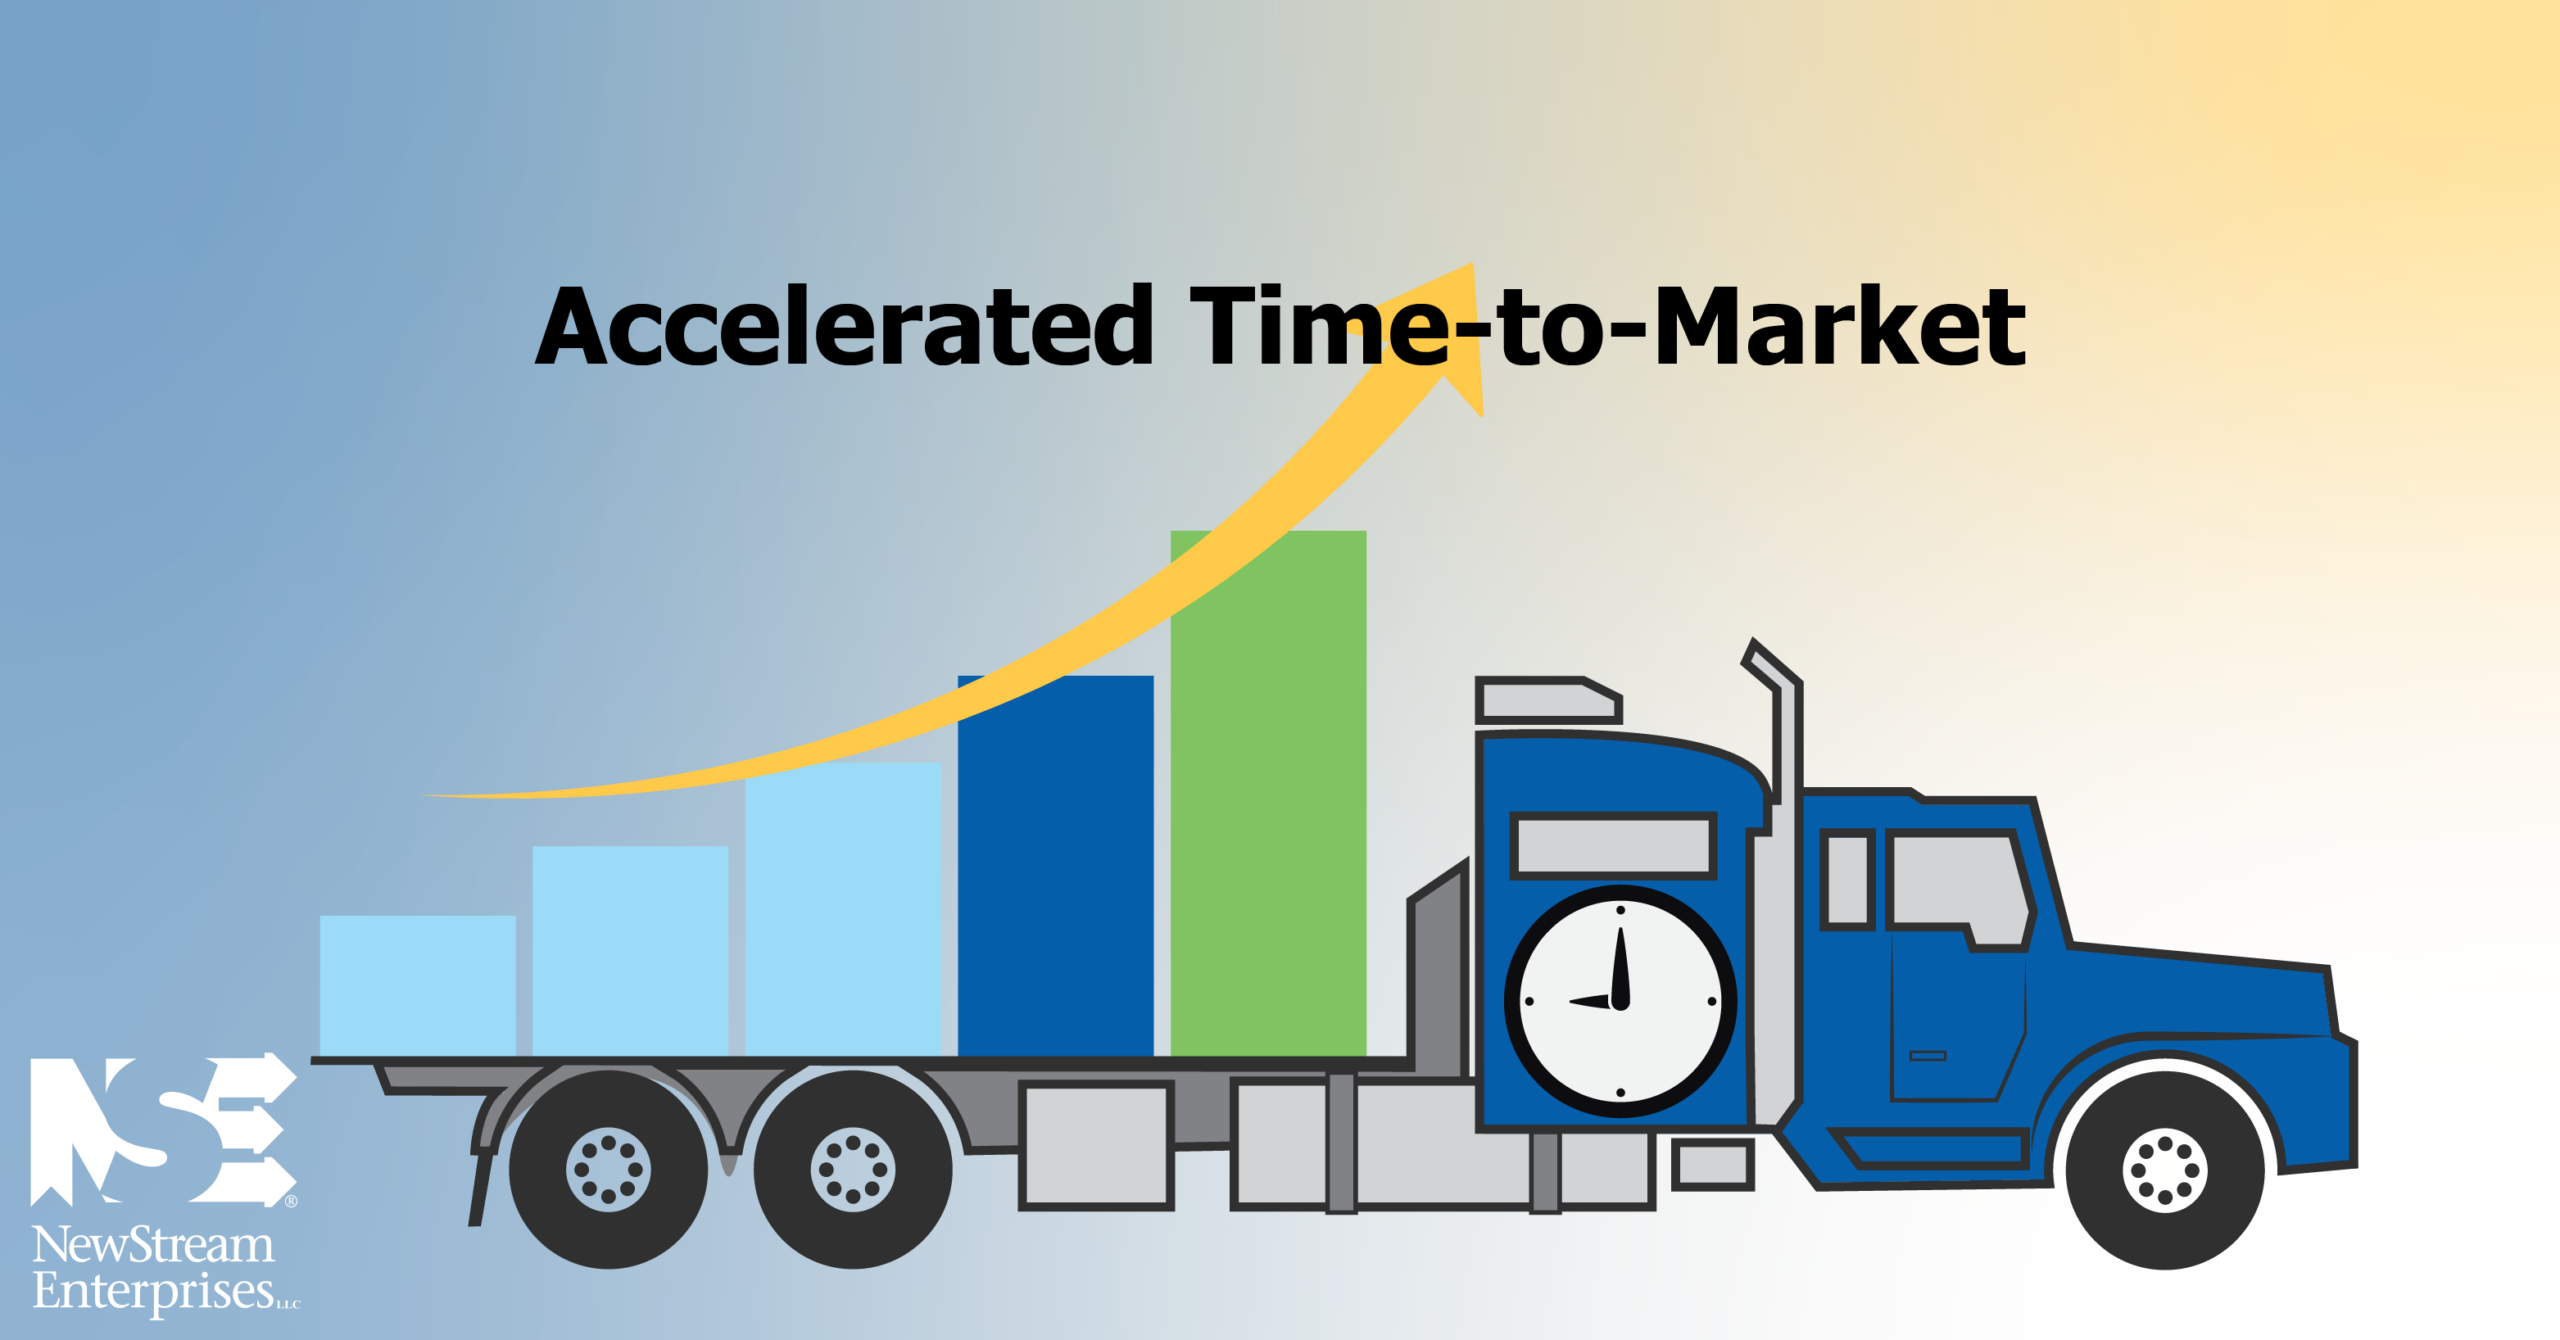 Accelerated Time-to-Market